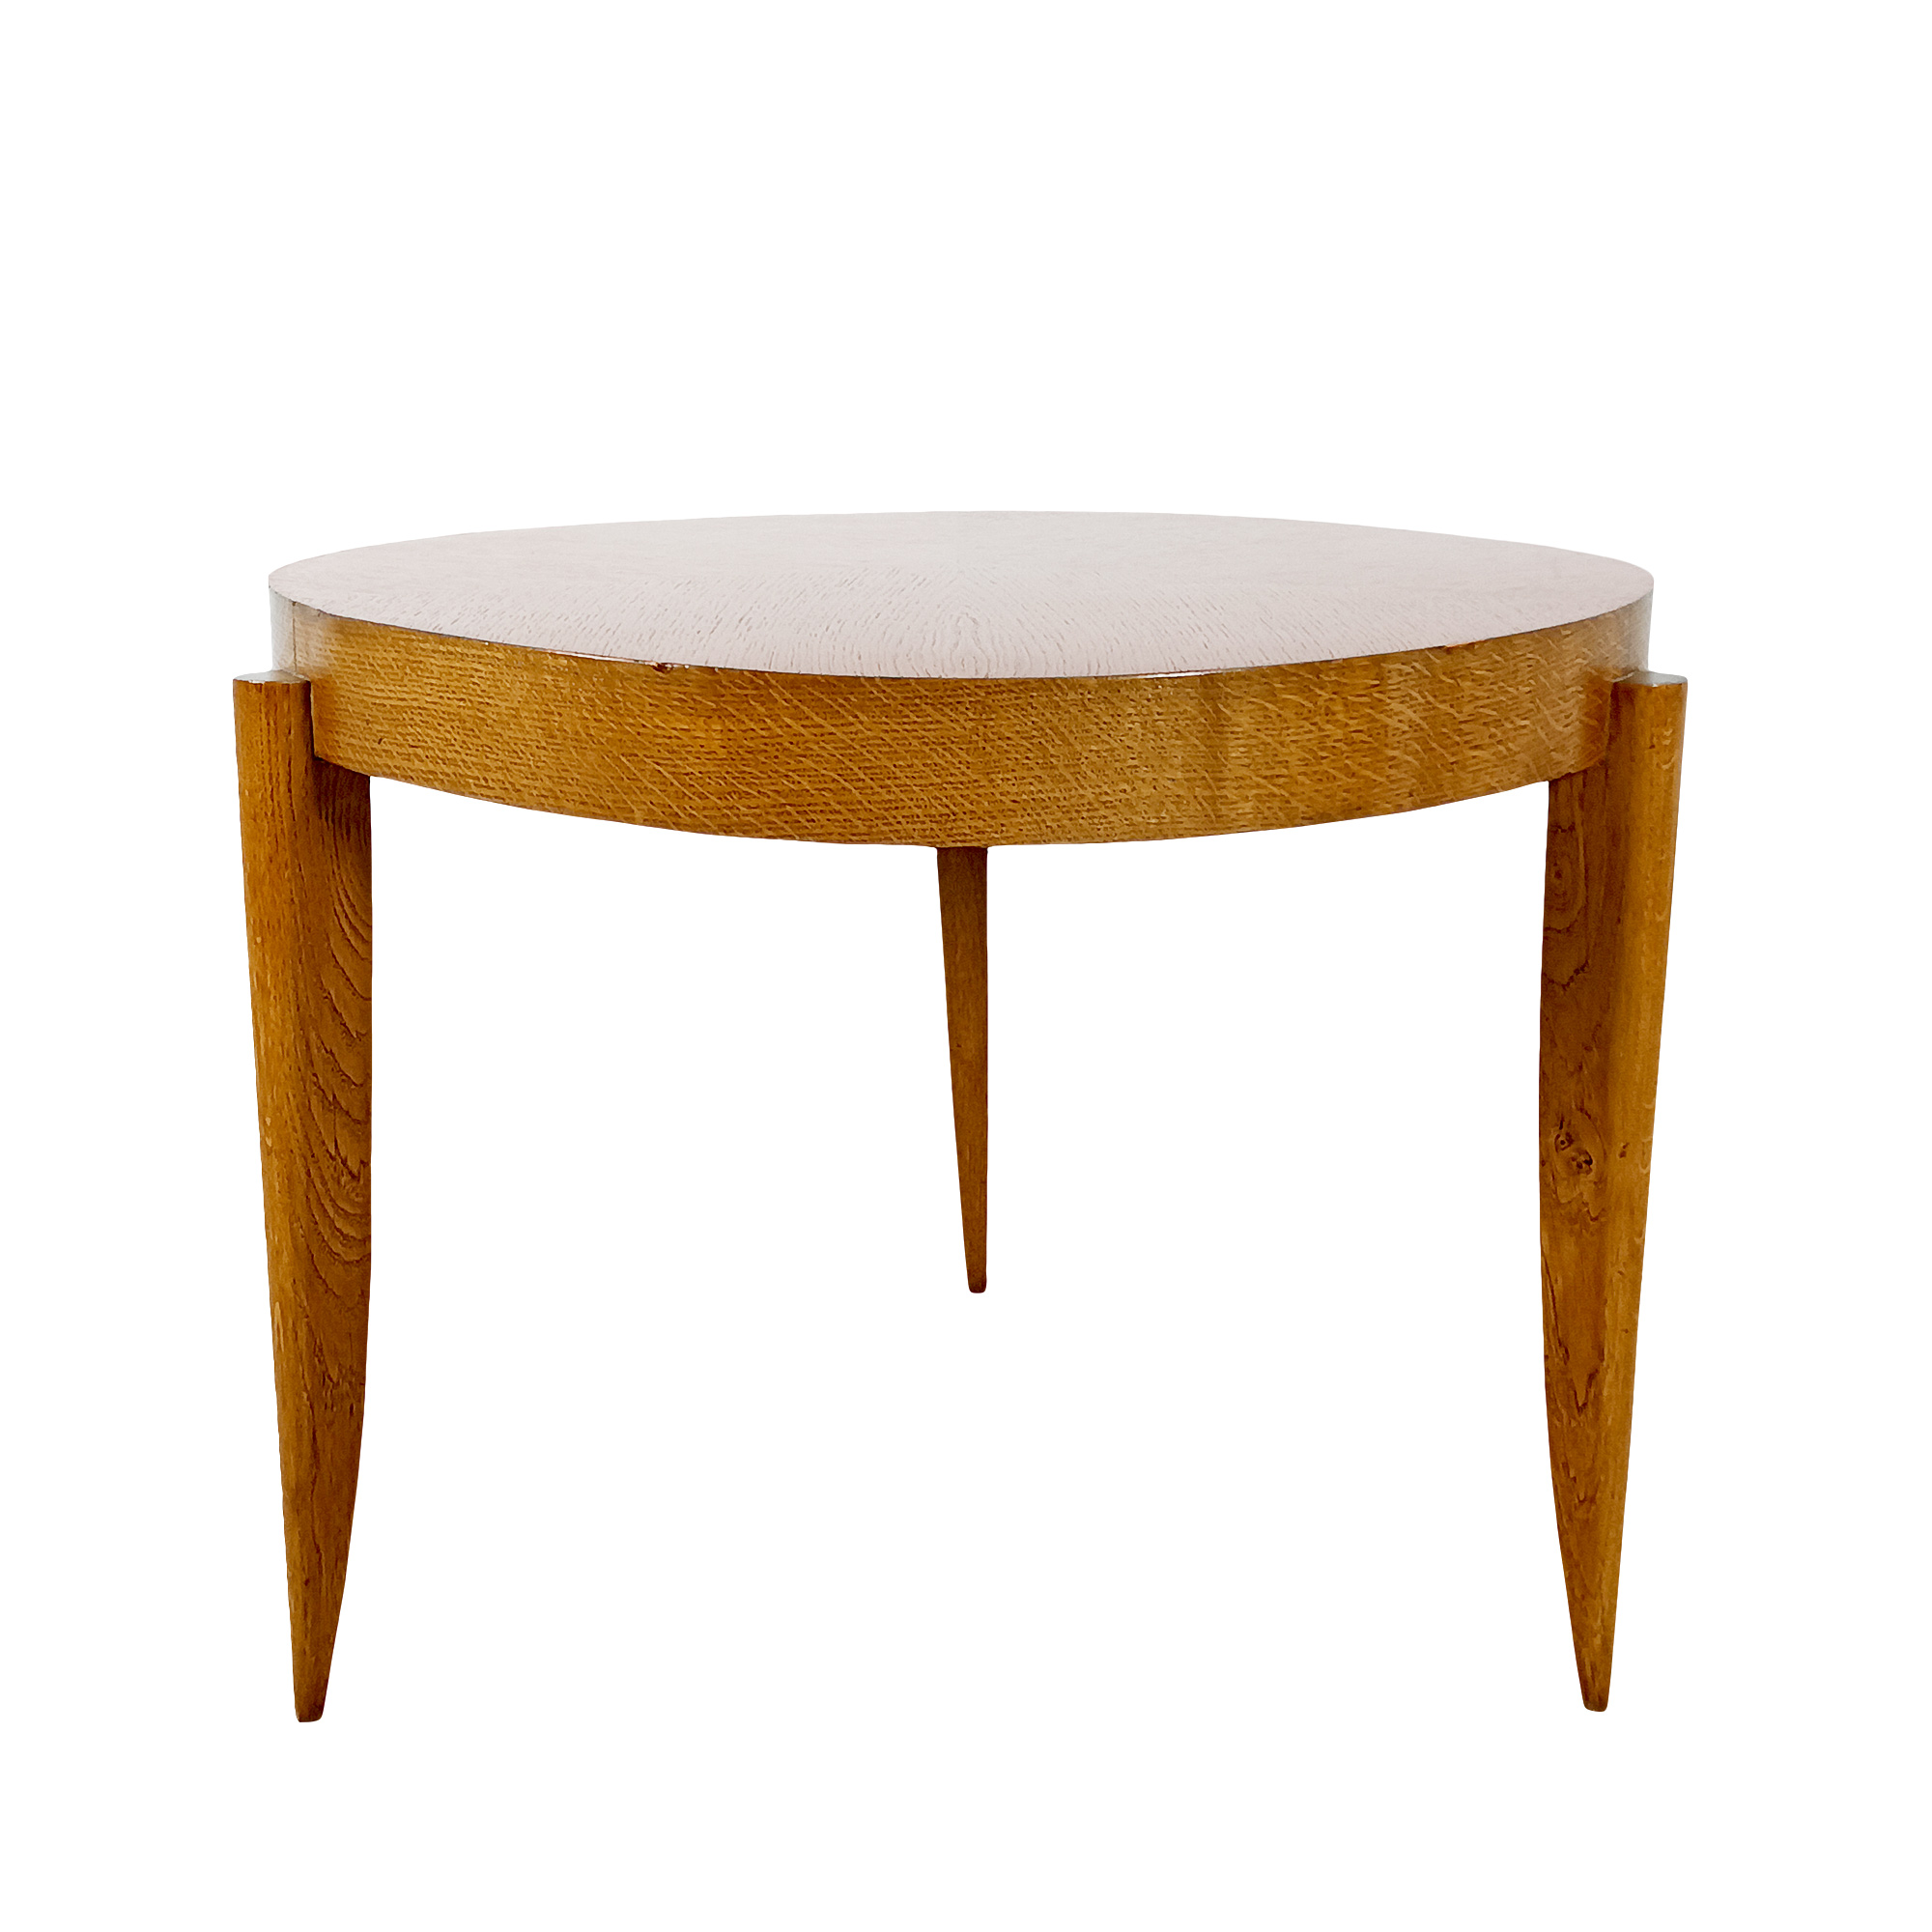 Table basse ronde tripode – France 1940